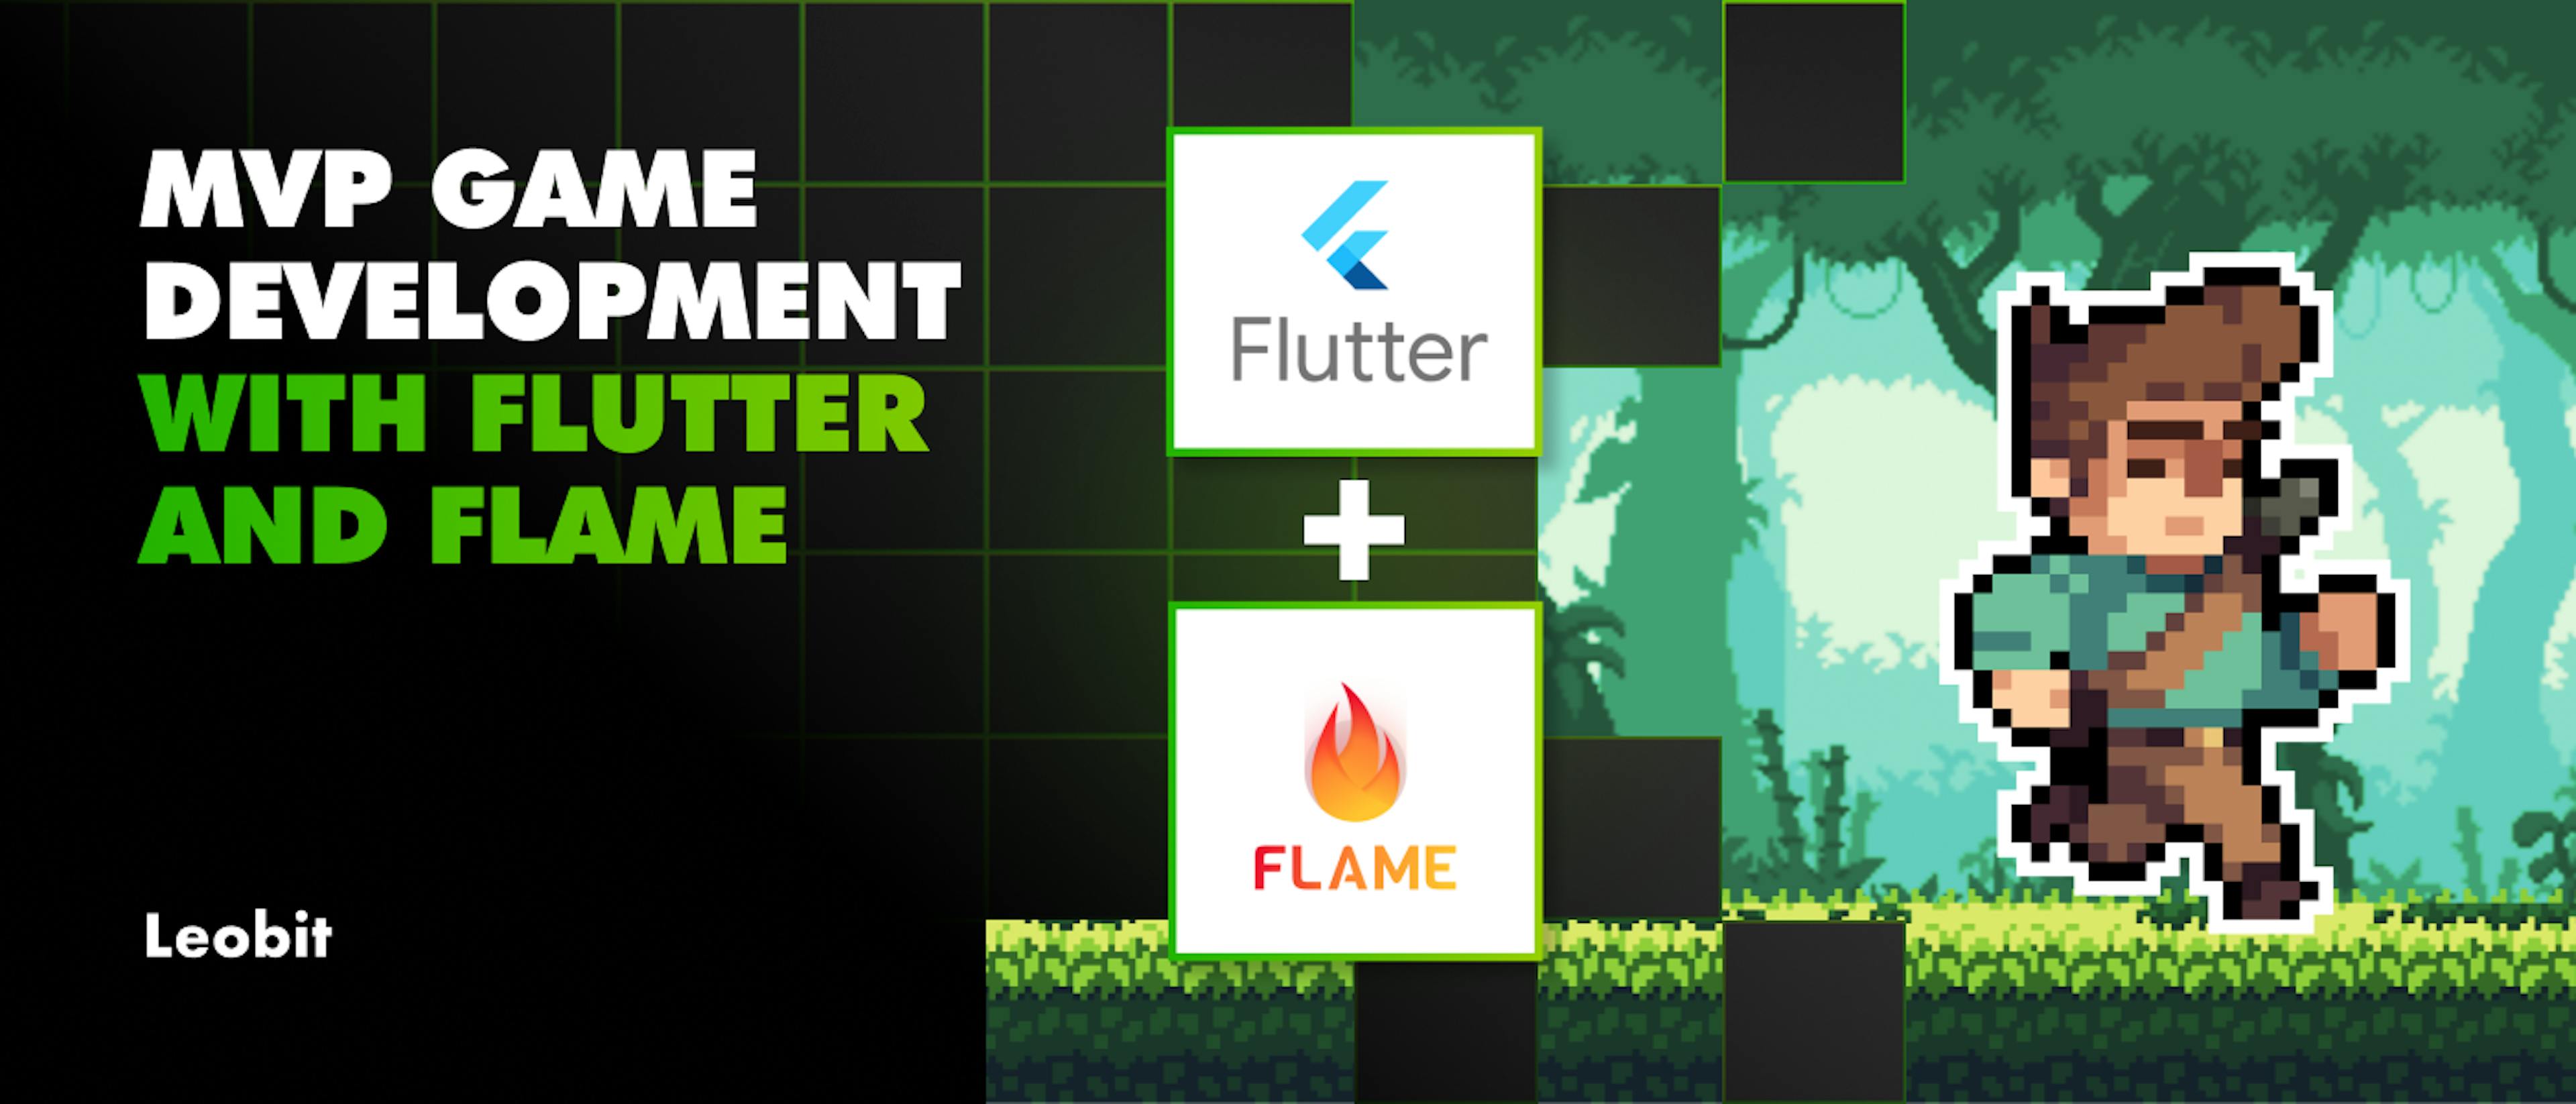 featured image - 使用 Flutter 和 Flame 进行 MVP 游戏开发